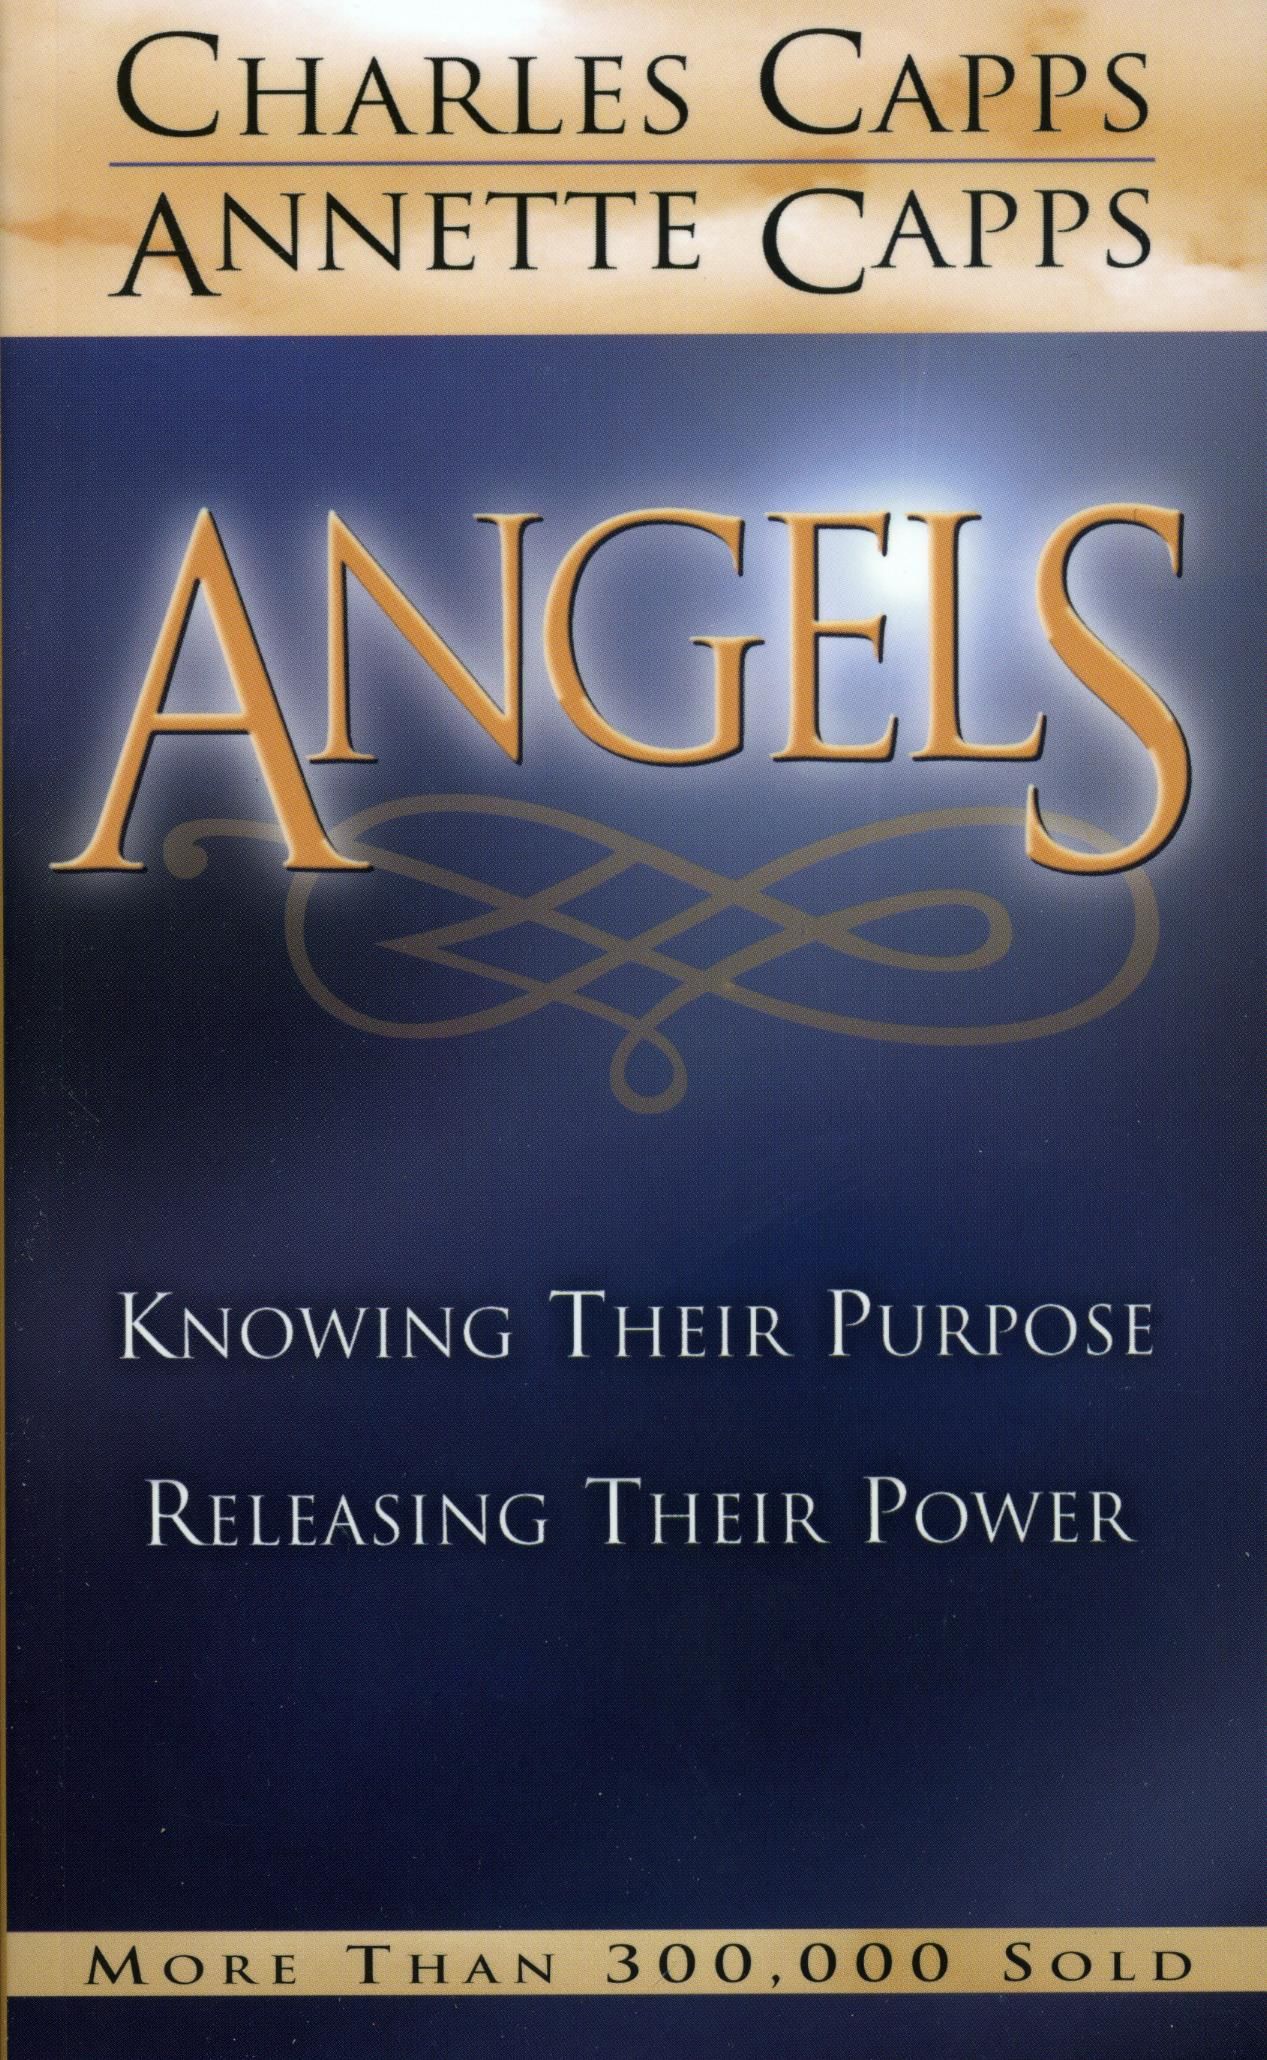 Charles & Anette Capps: Angels